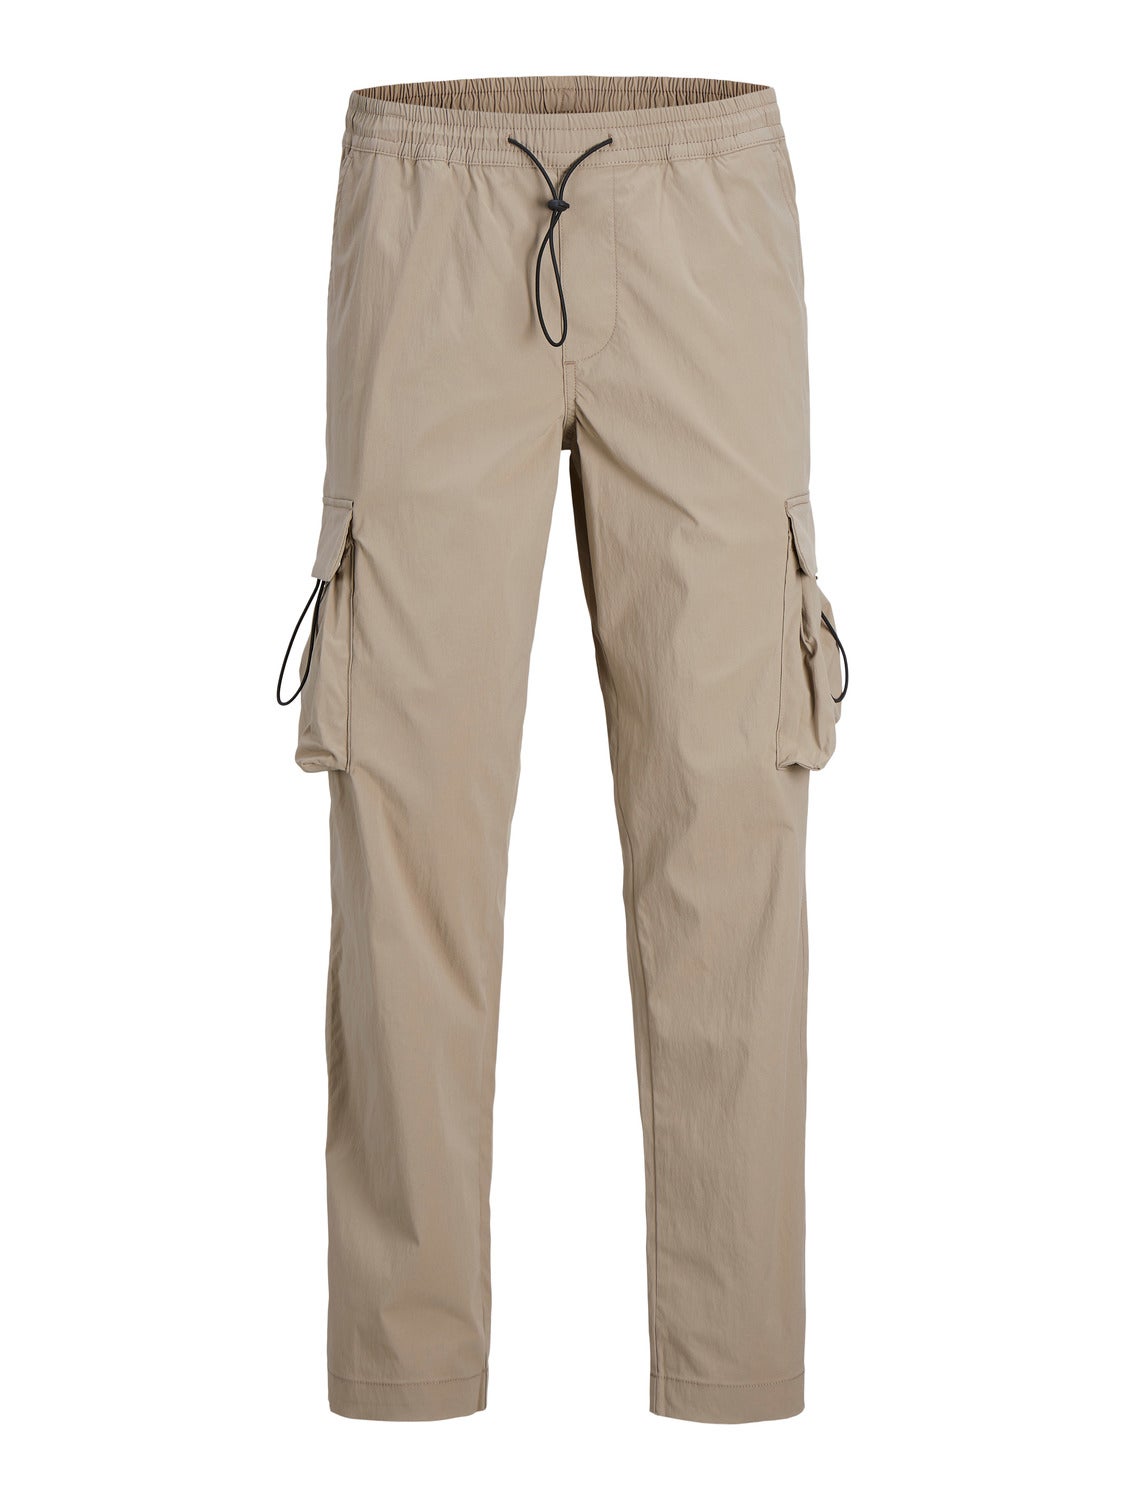 Men Relaxed Fit Dance Cargo Trousers  The Dance Bible